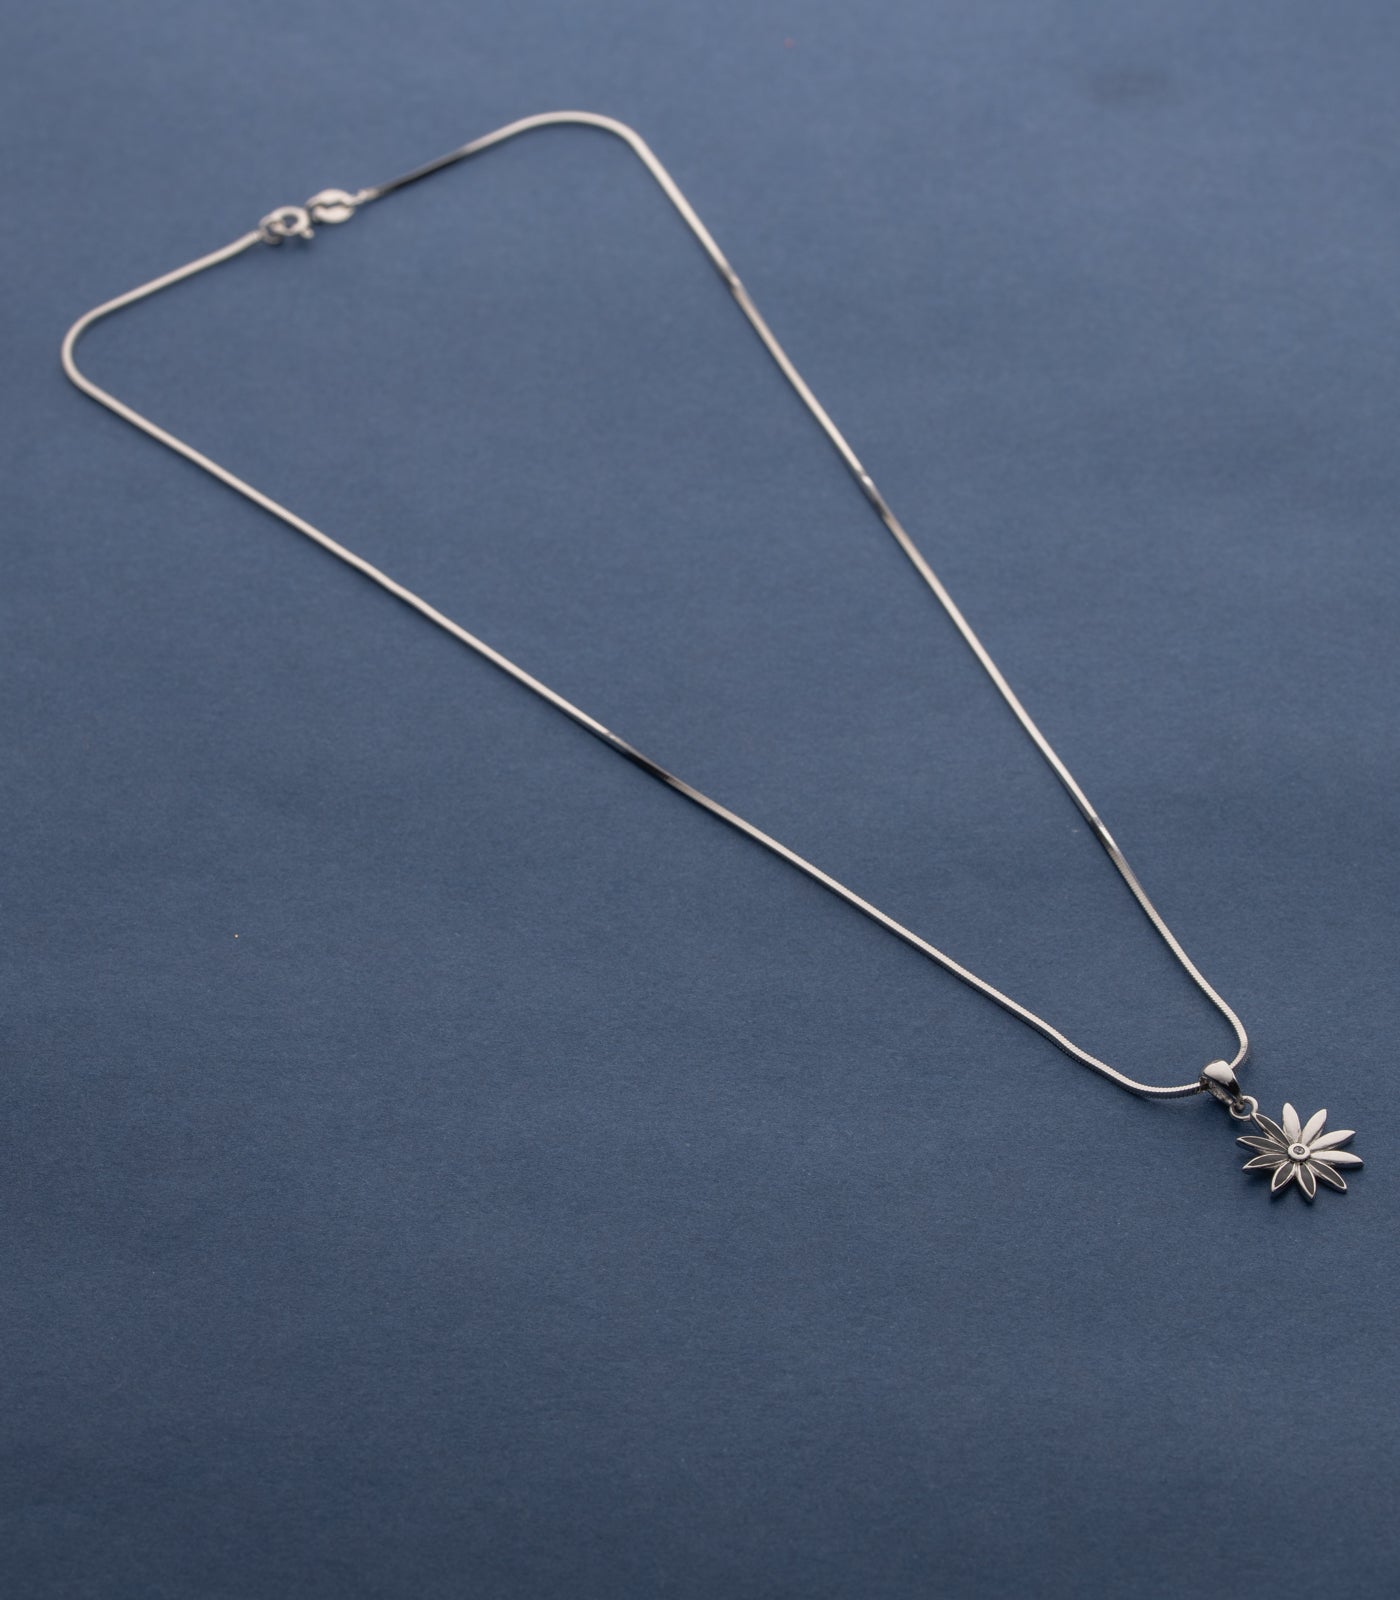 Shiny Floral Necklace (Silver)